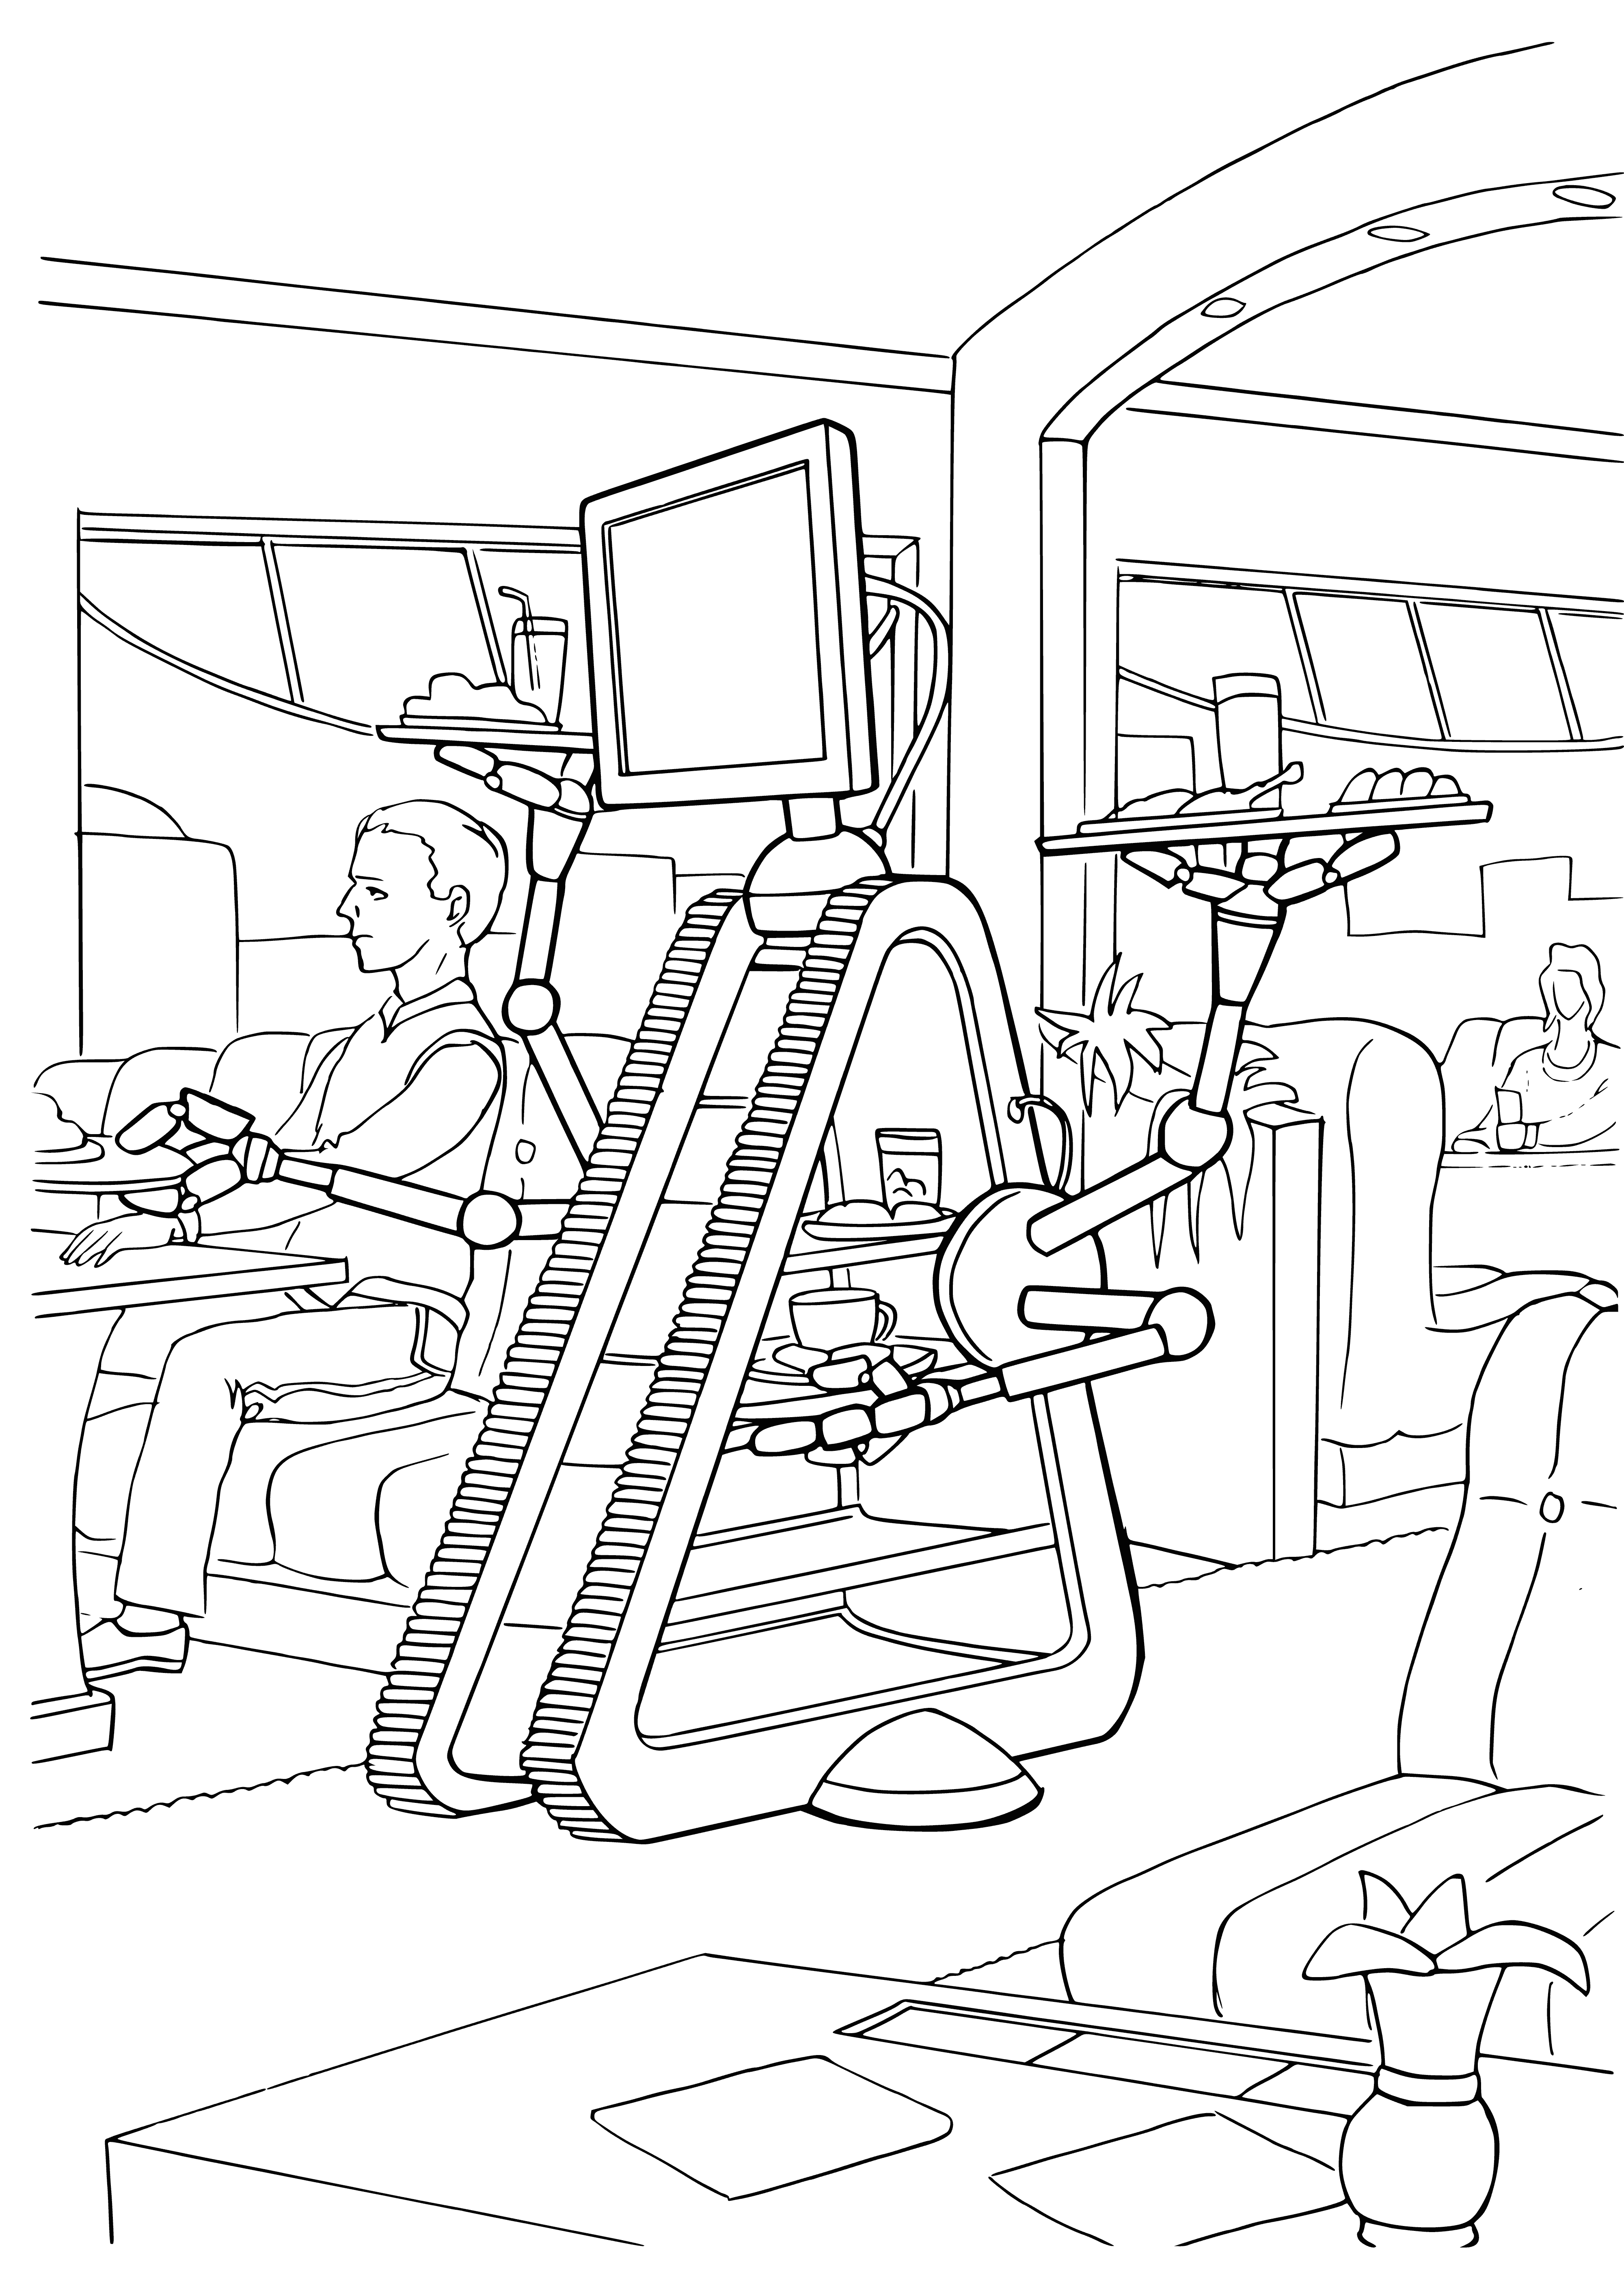 Robot waiter coloring page